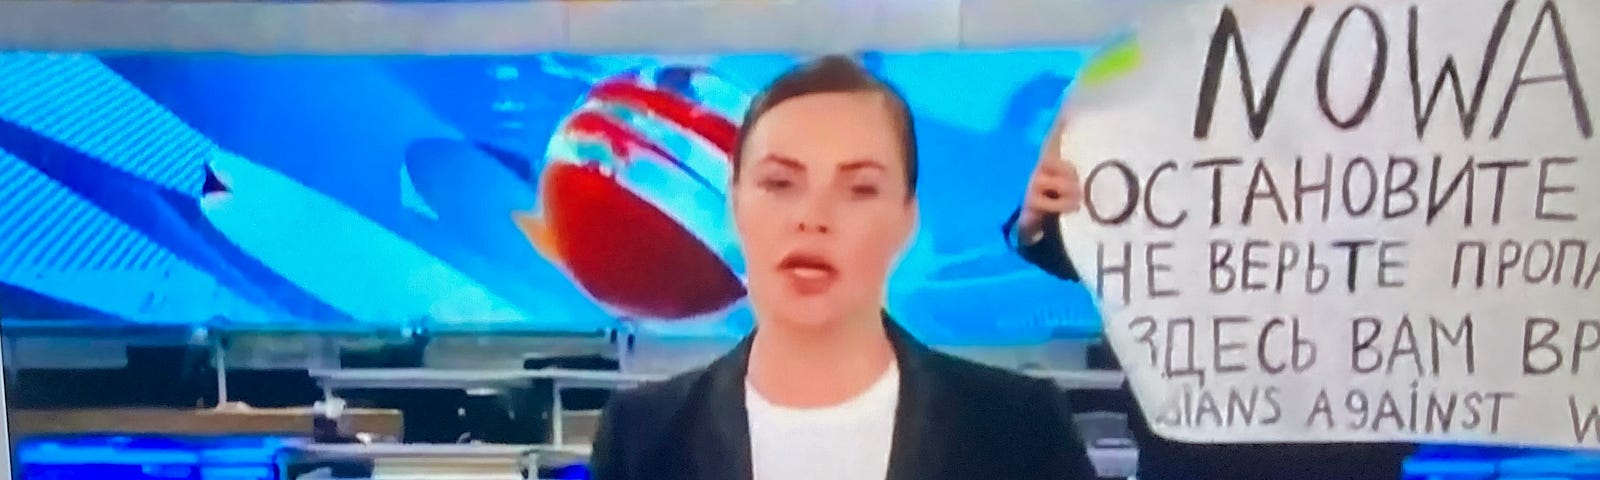 Editor-producer Marina Ovsyannikova holds protest sign behind female anchor on Russian state television news program on Channel One.